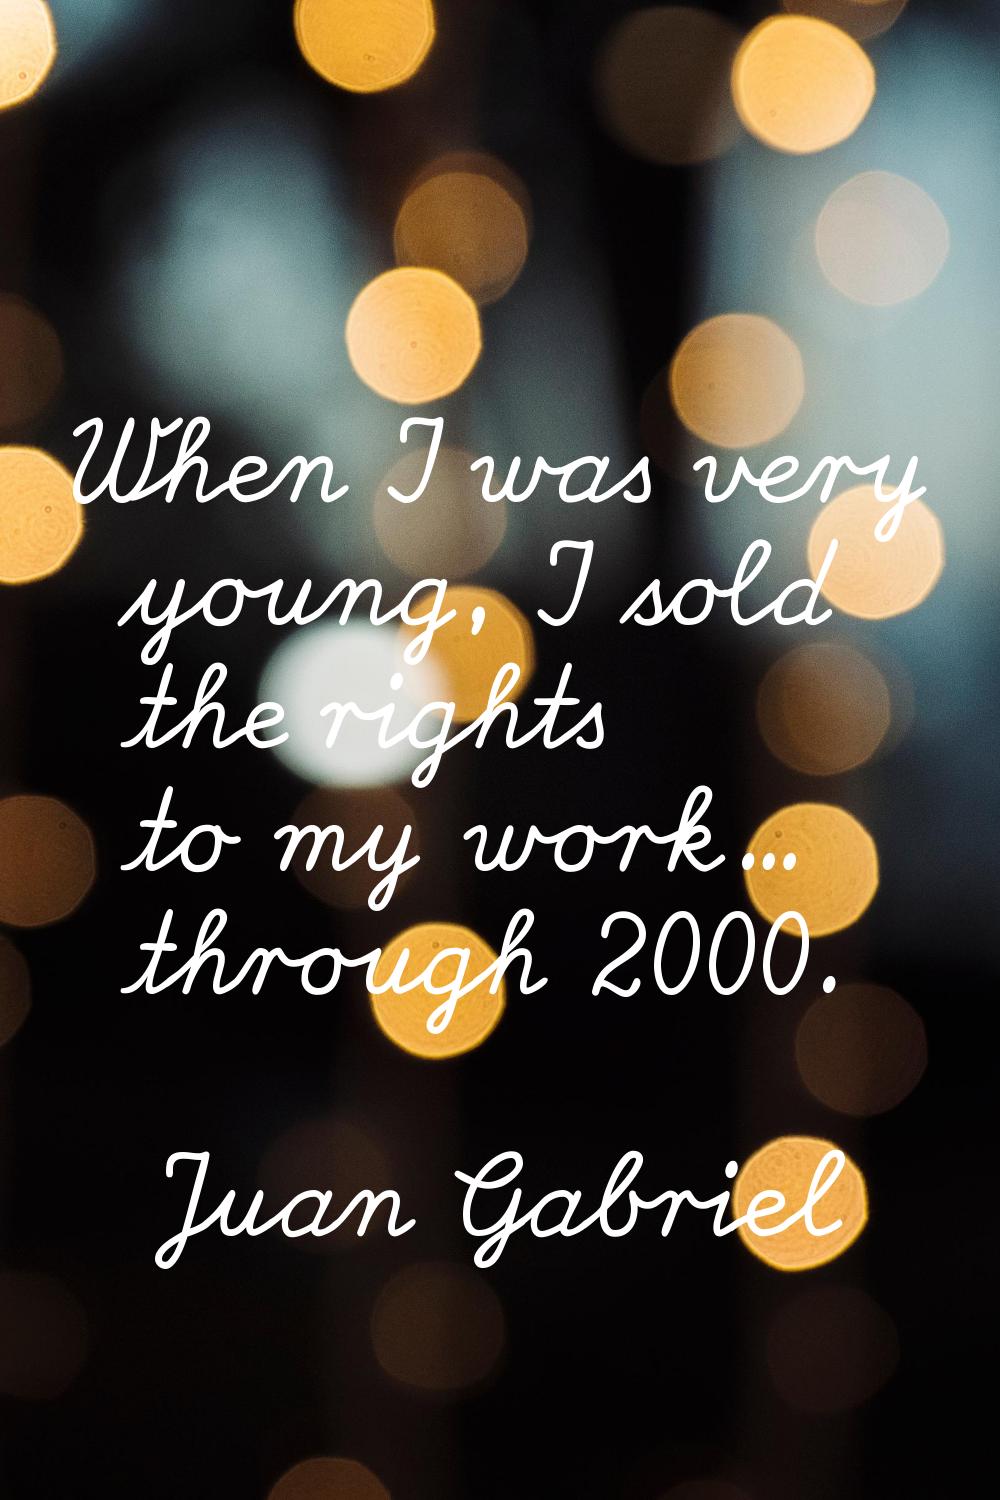 When I was very young, I sold the rights to my work... through 2000.